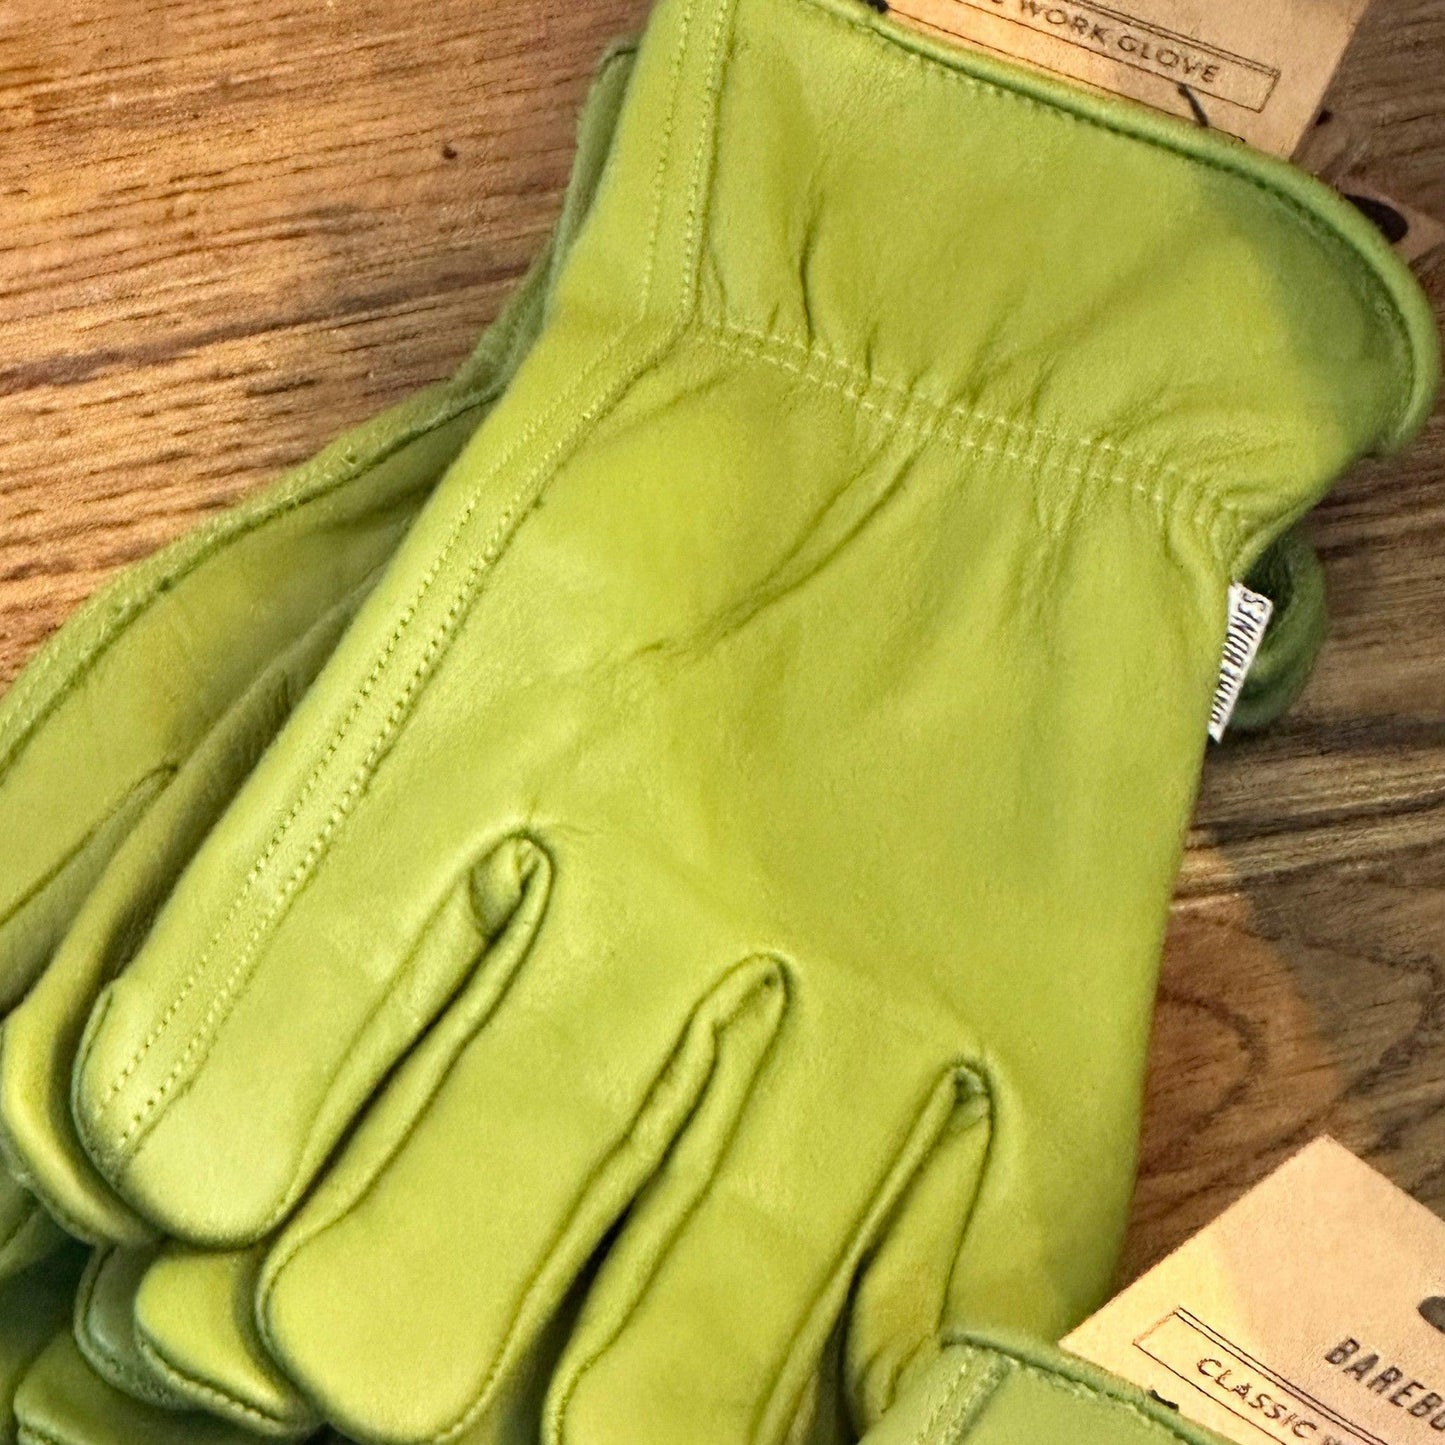 Classic Work Glove | (Barebones Living)-available at Hidden Seed Plant Shop